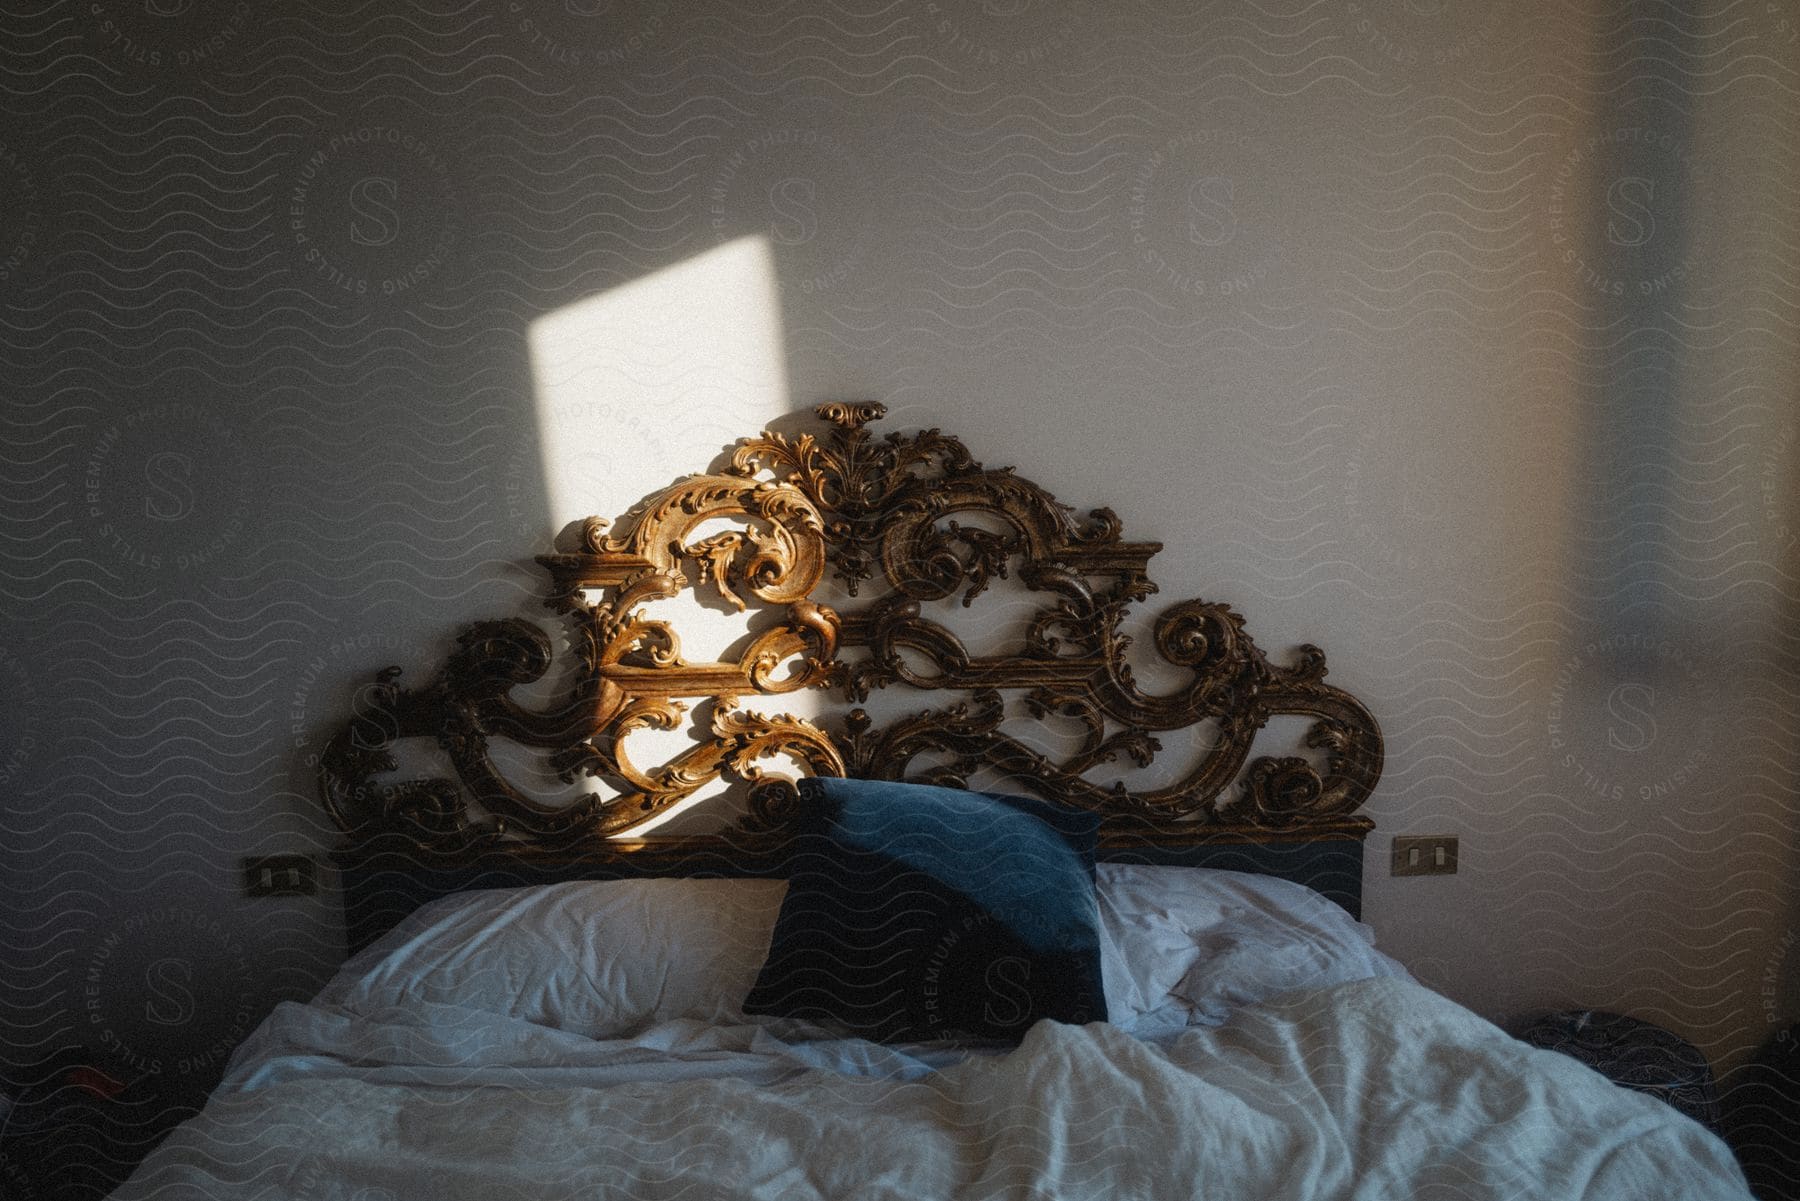 Blue pillow on bed with ornate headboard and sunlit rectangle on wall through window